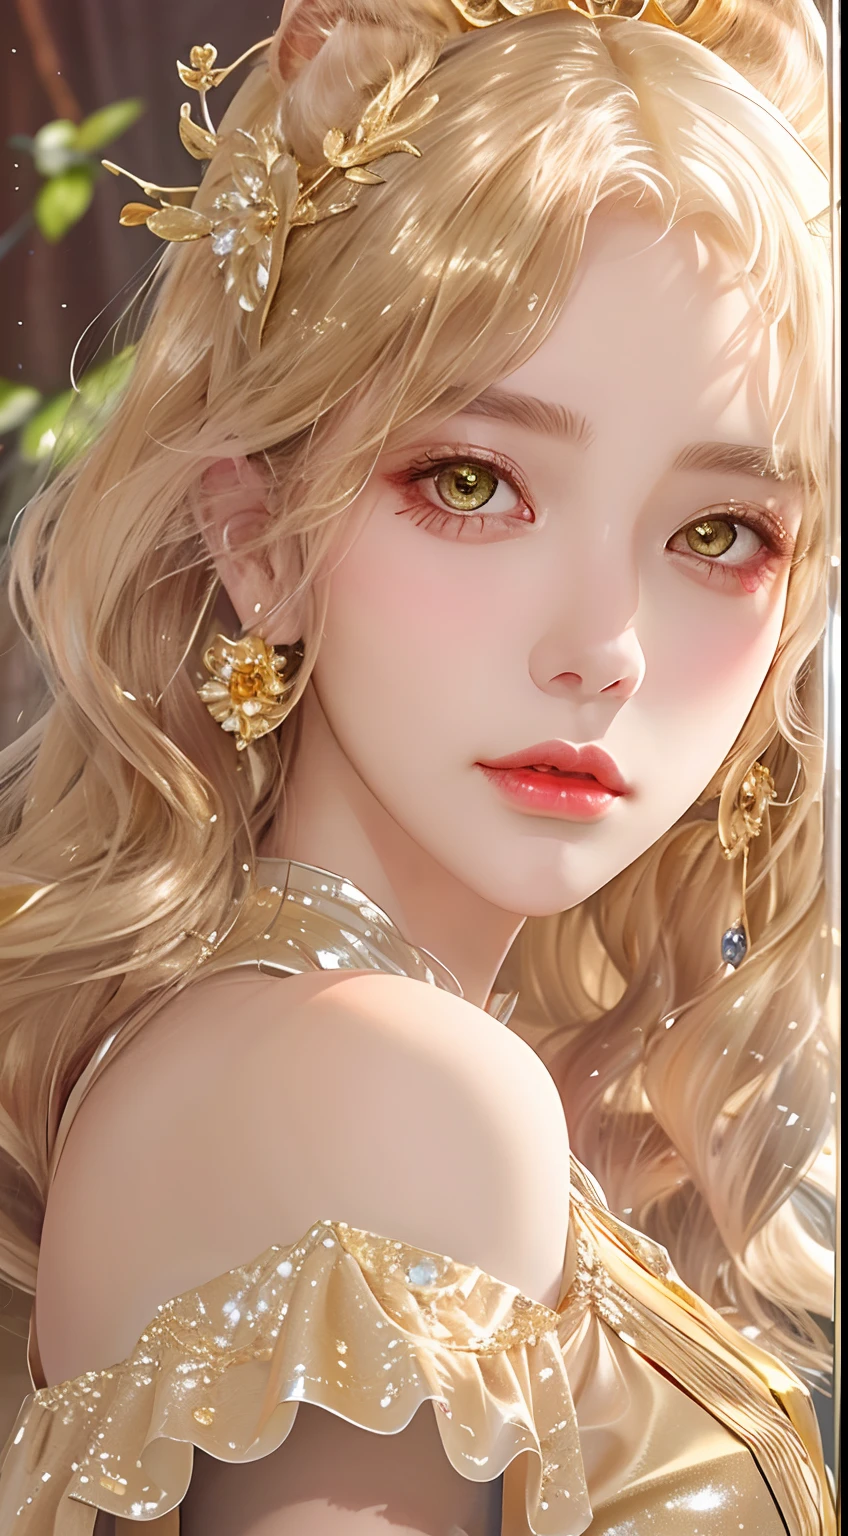 The appearance is very attractive, Wear a pair of gold pantyhose，Wearing a golden Lolita dress，Fair and delicate skin，The eyes are a pair of clear and bright gemstone gold，The hair is gemstone golden，waist-high，The whole person exudes a fresh and lovely atmosphere，16 yaers old，Extremely realistic